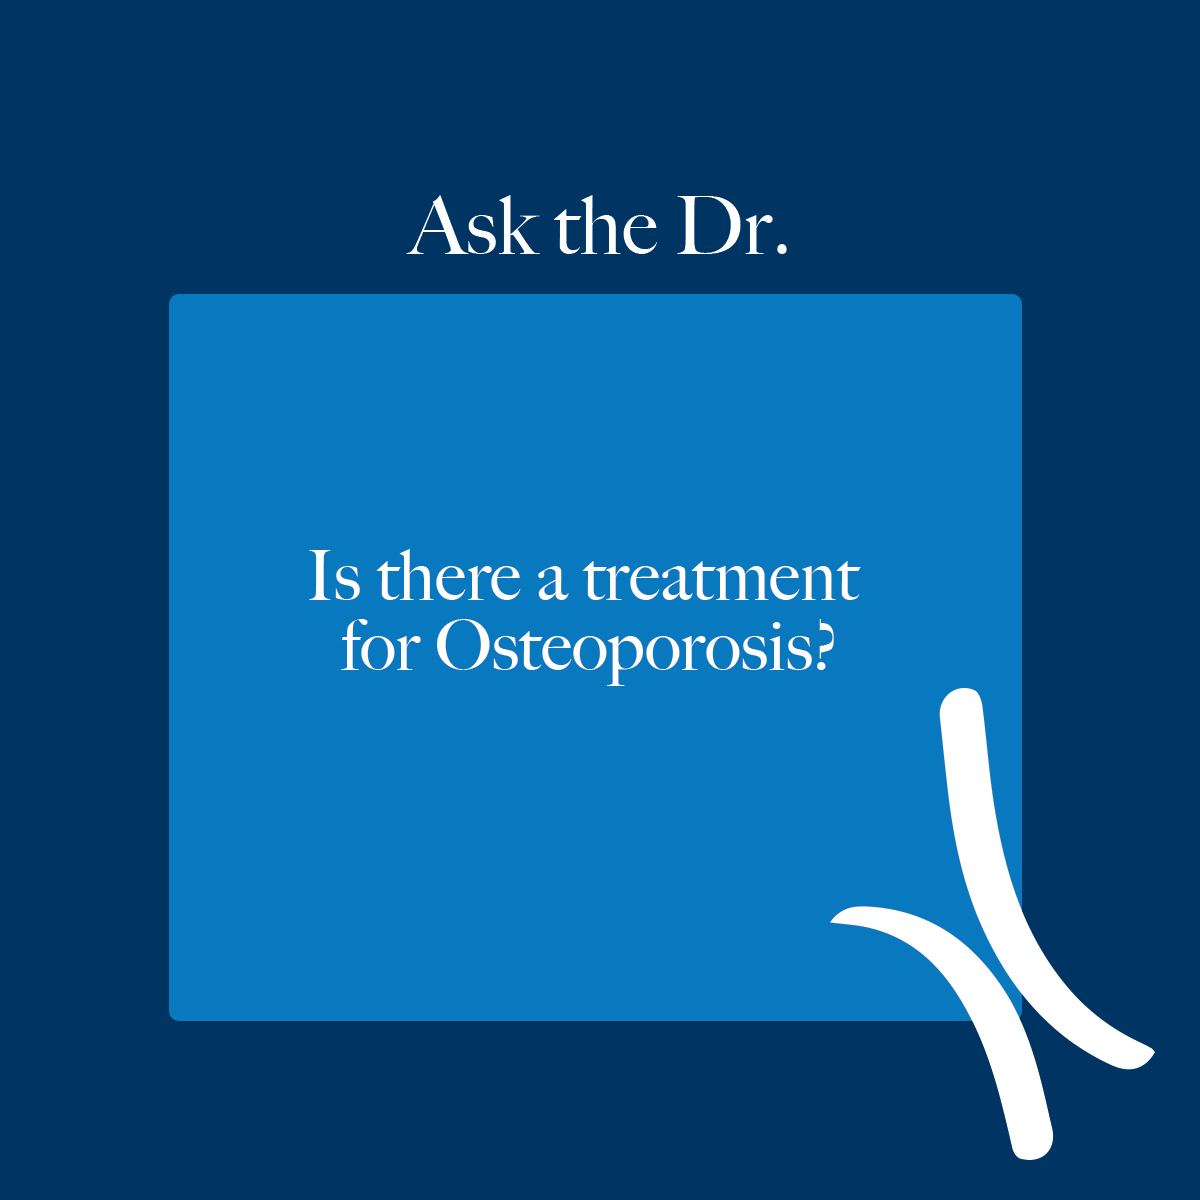 AsktheDoctor_OsteoporosisTreatment1